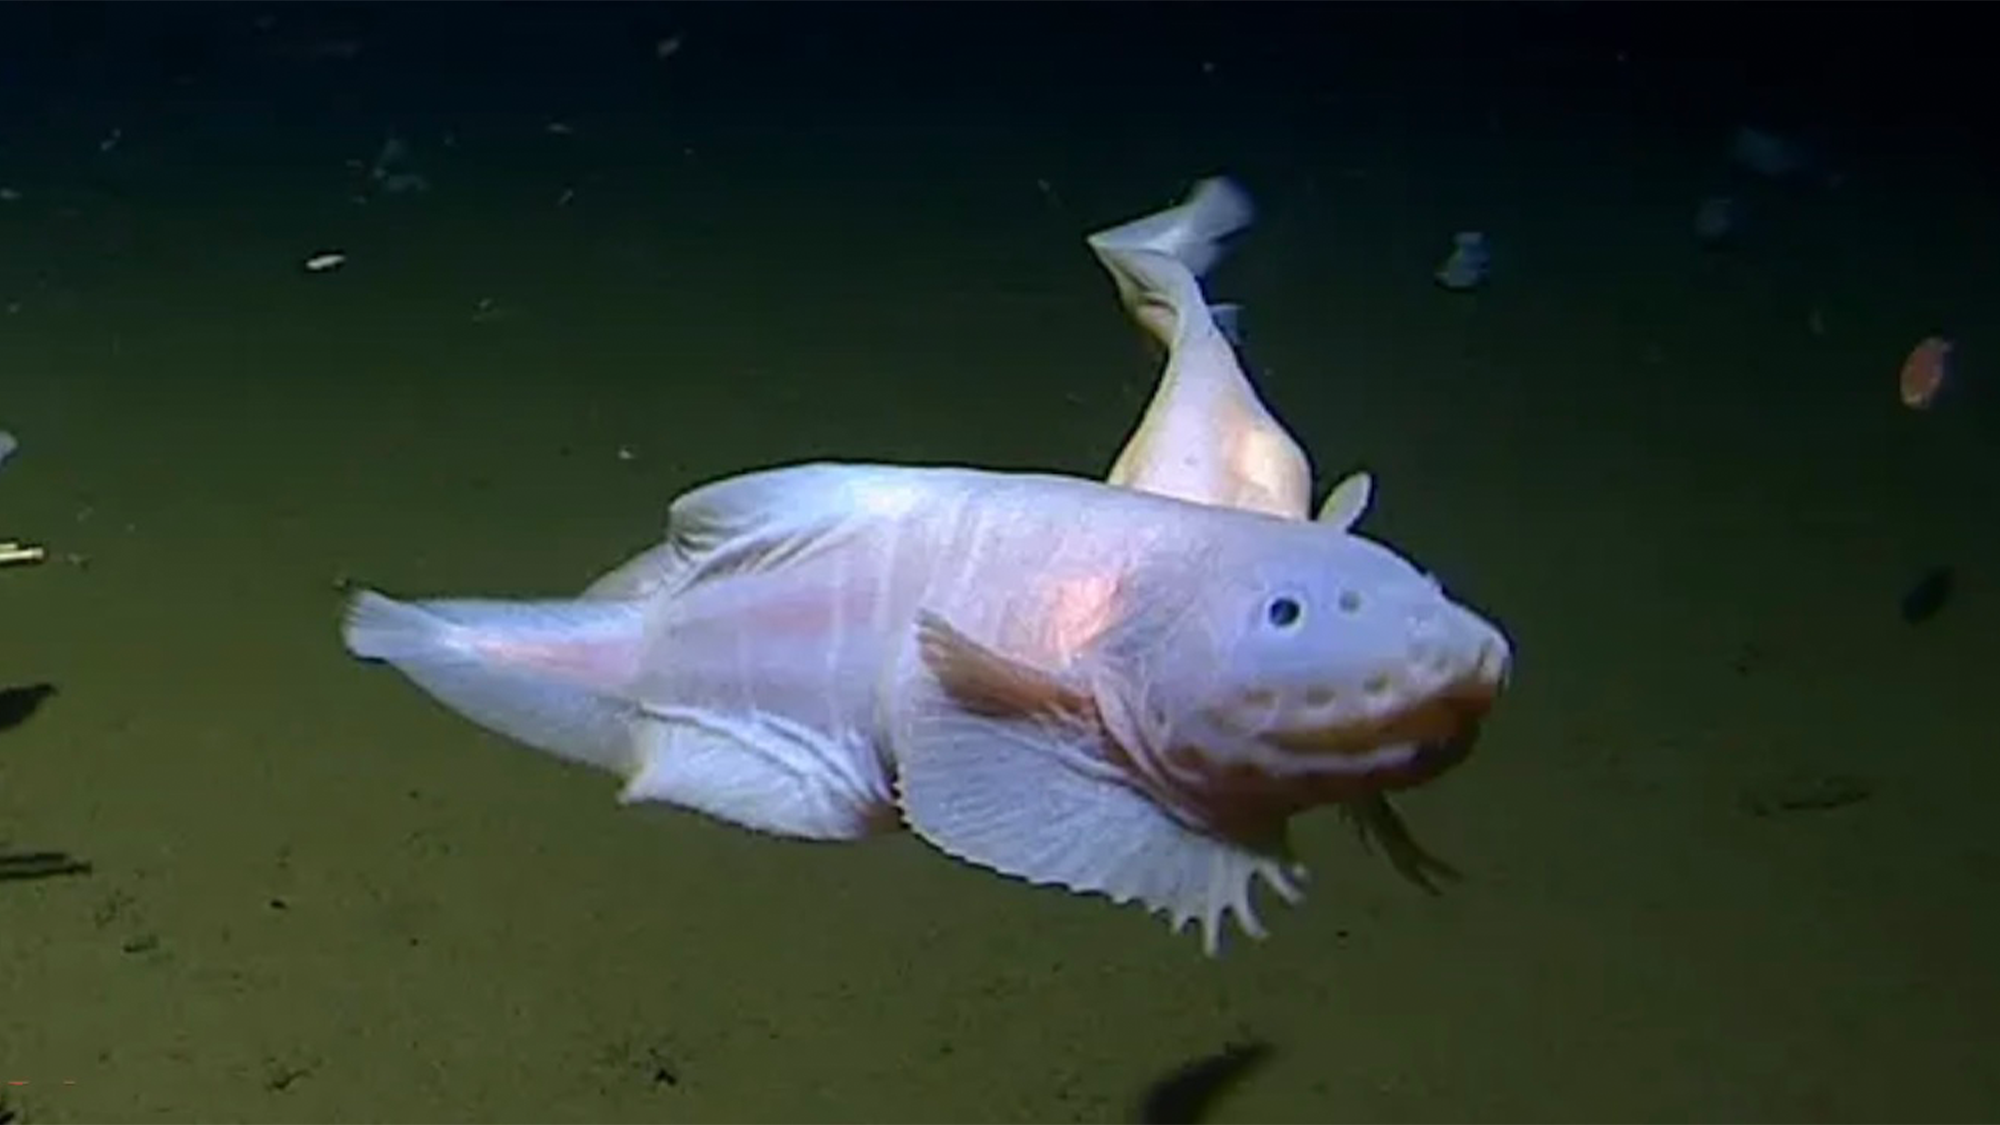 This goofy-looking fish was found 27,000 feet deep